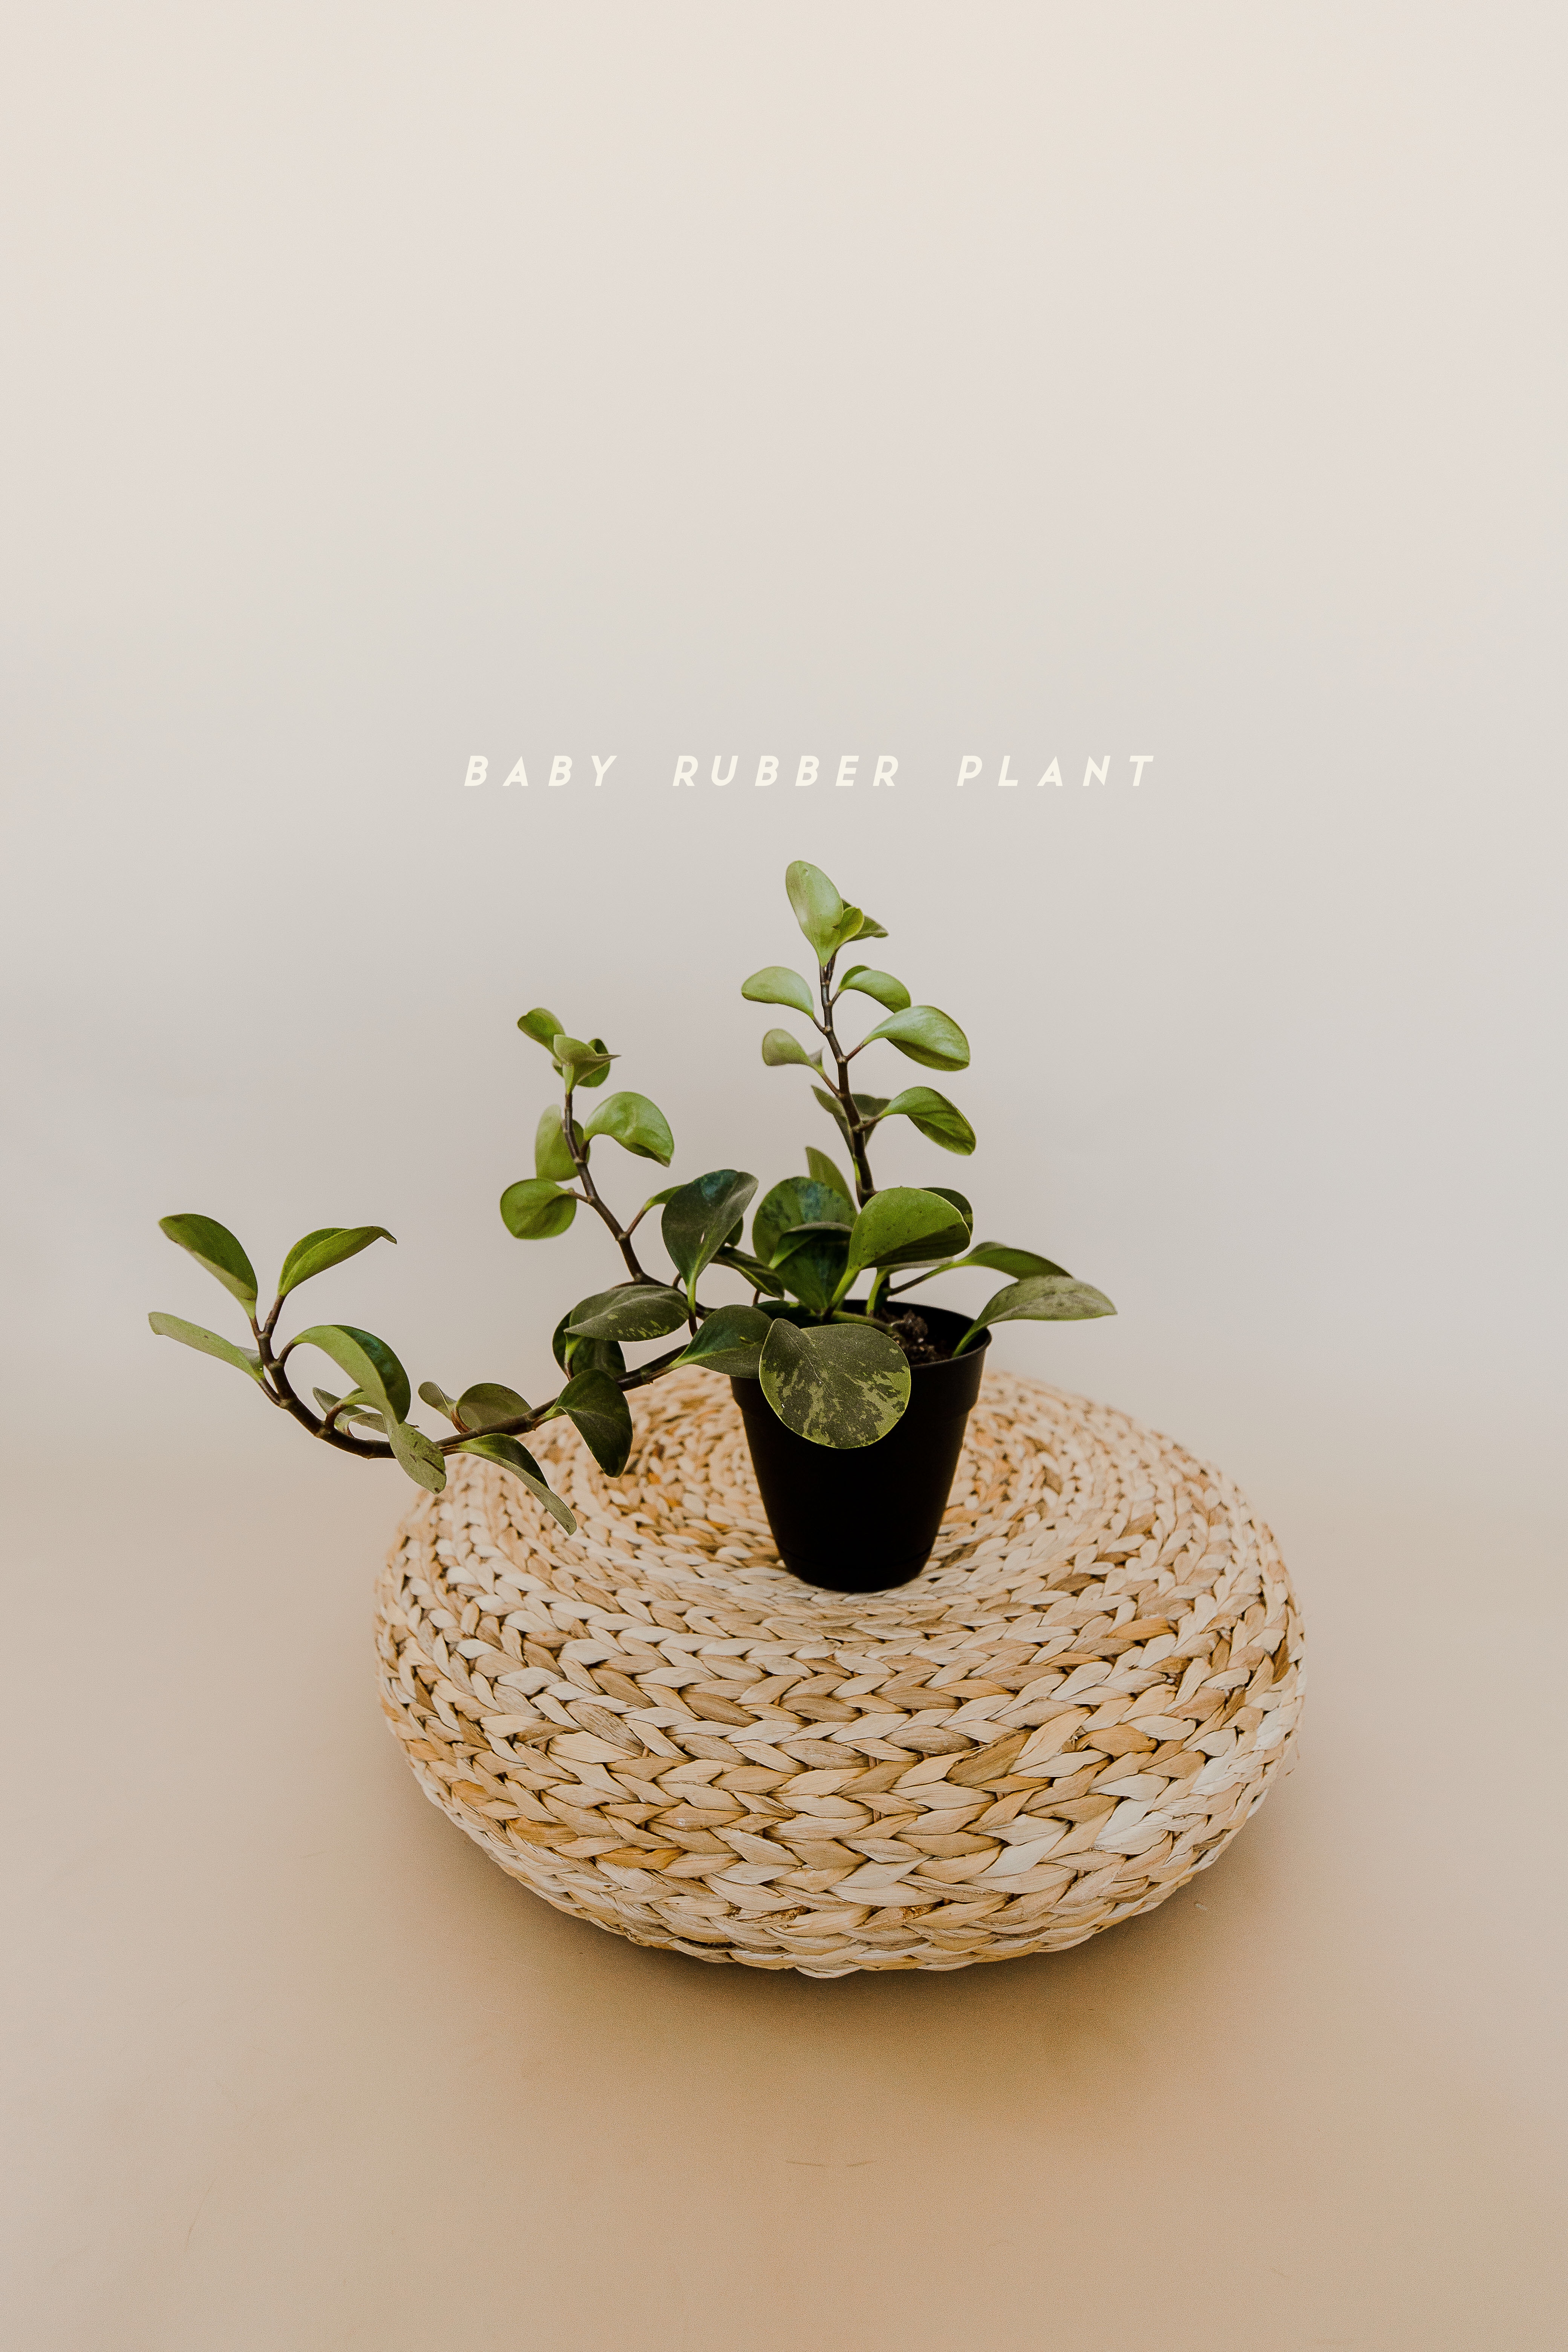 tropical house plant baby rubber tree